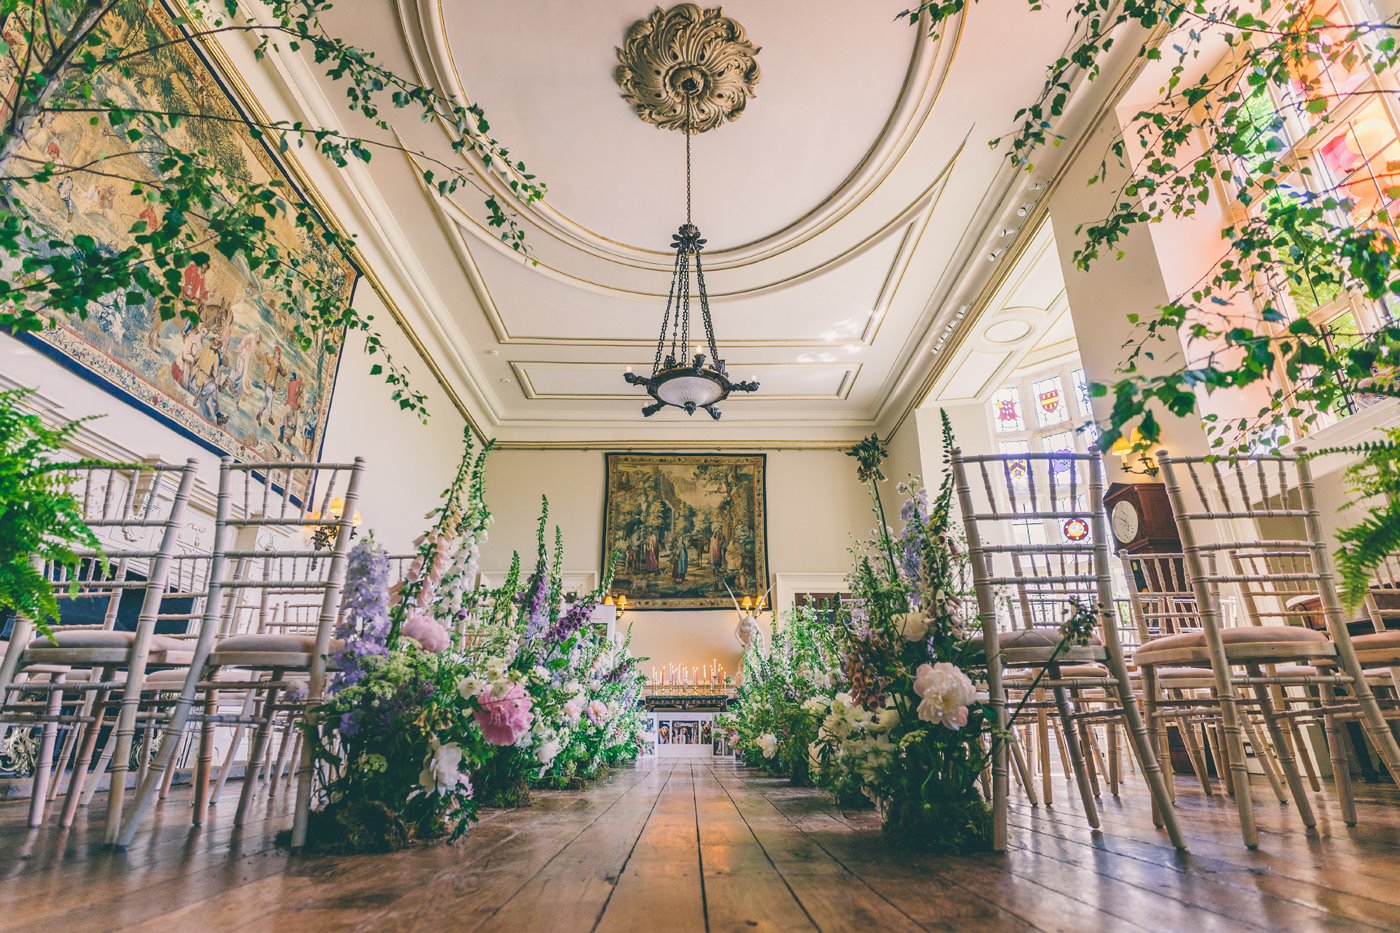 Stunning floral wedding aisle with tall wildflower arrangements and trees flanking the wedding aisle in the ceremony hall at Elmore Court in Gloucestershire